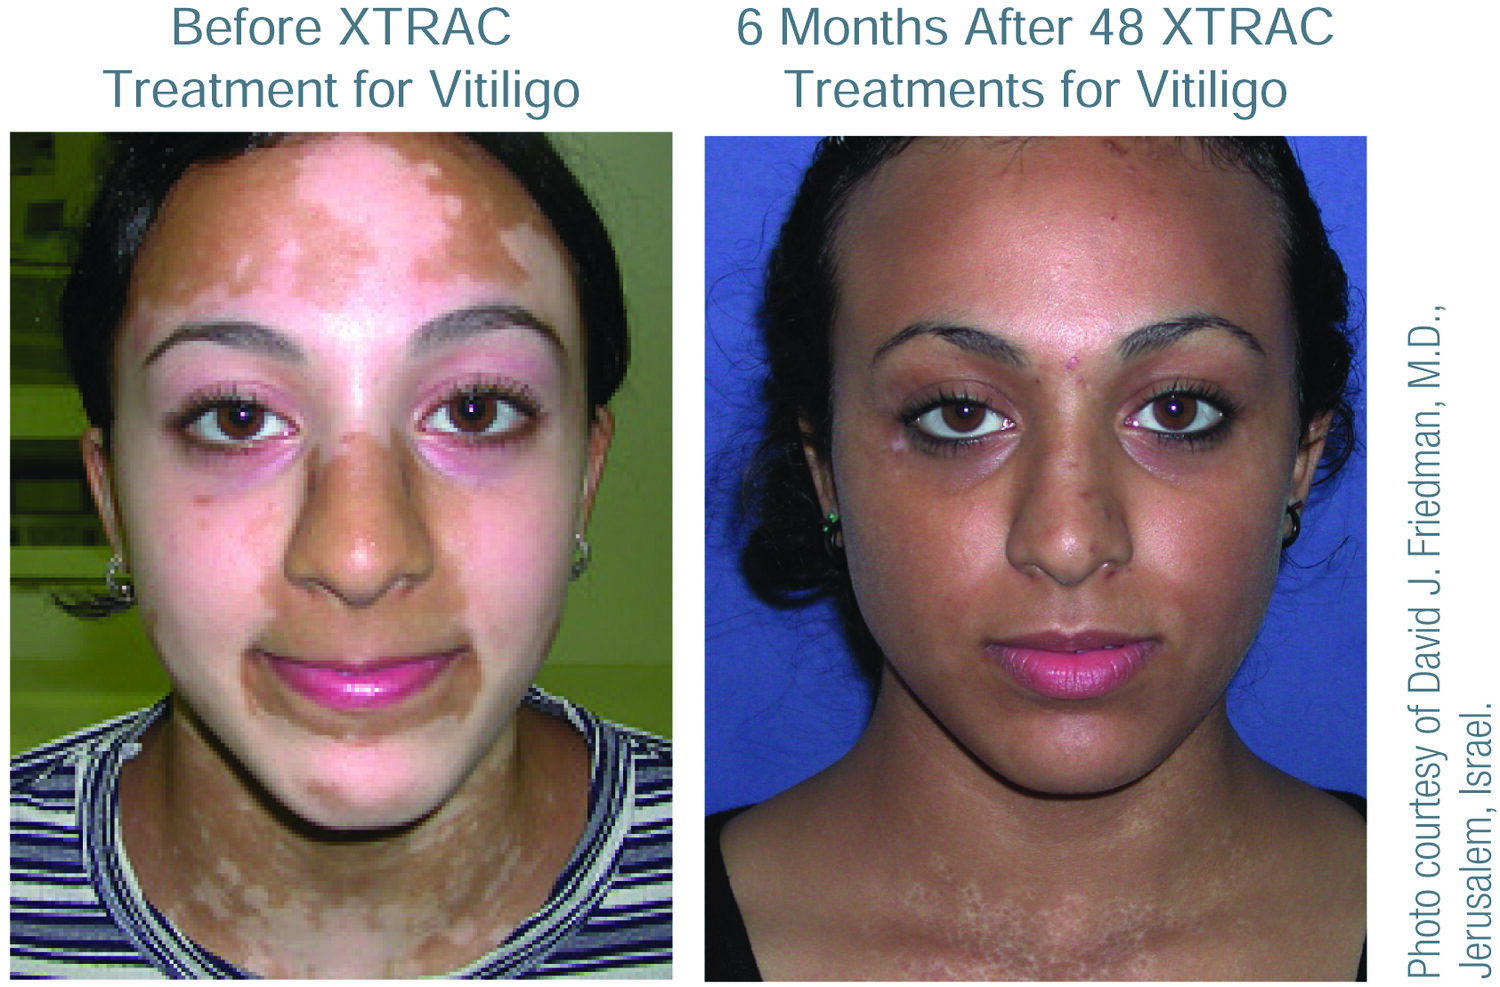 xtrac psoriasis treatment side effects)